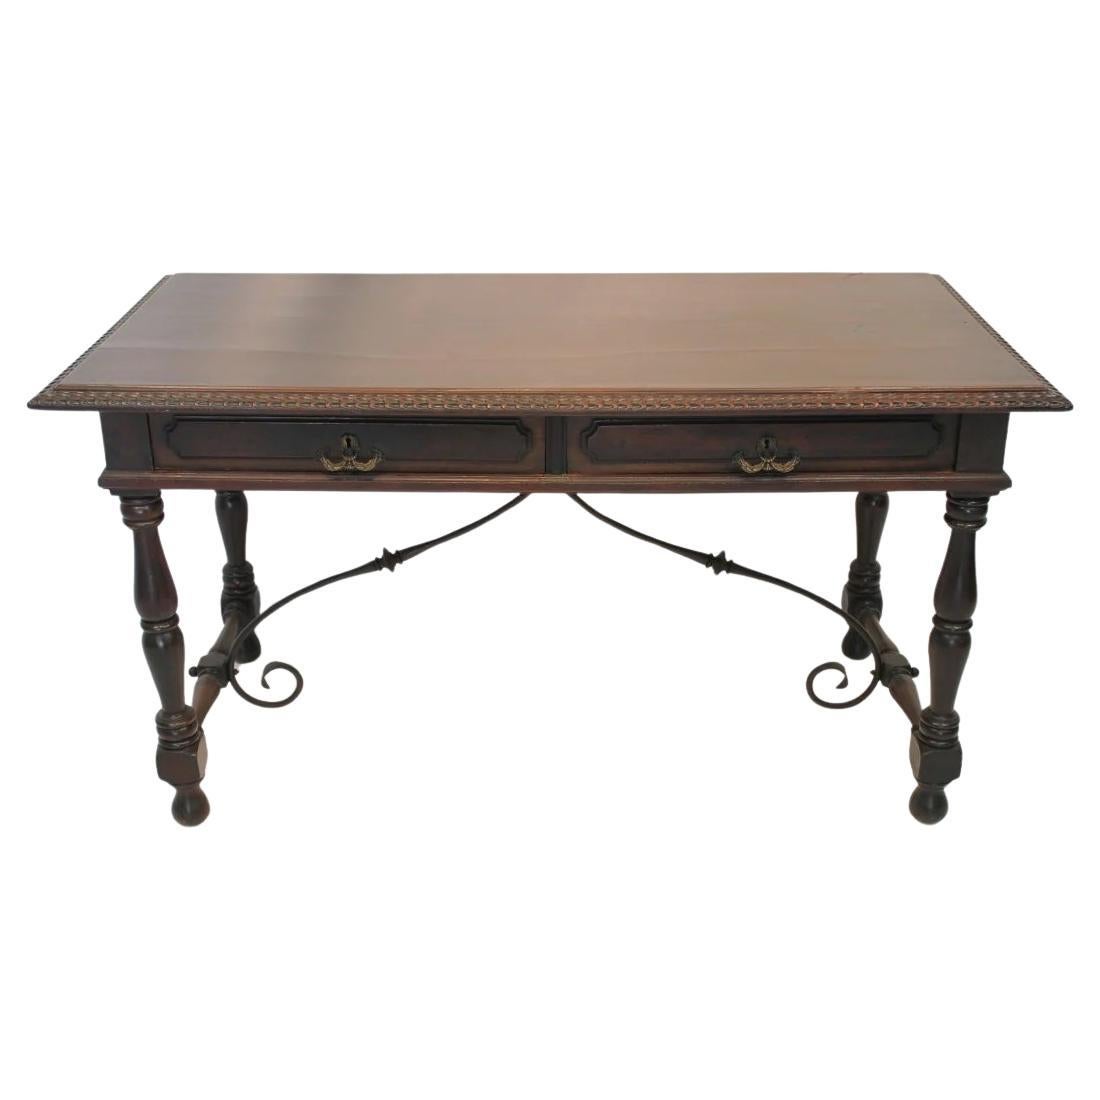 Antique Spanish Colonial Revival Desk with Iron Stretcher Bars Circa 1900